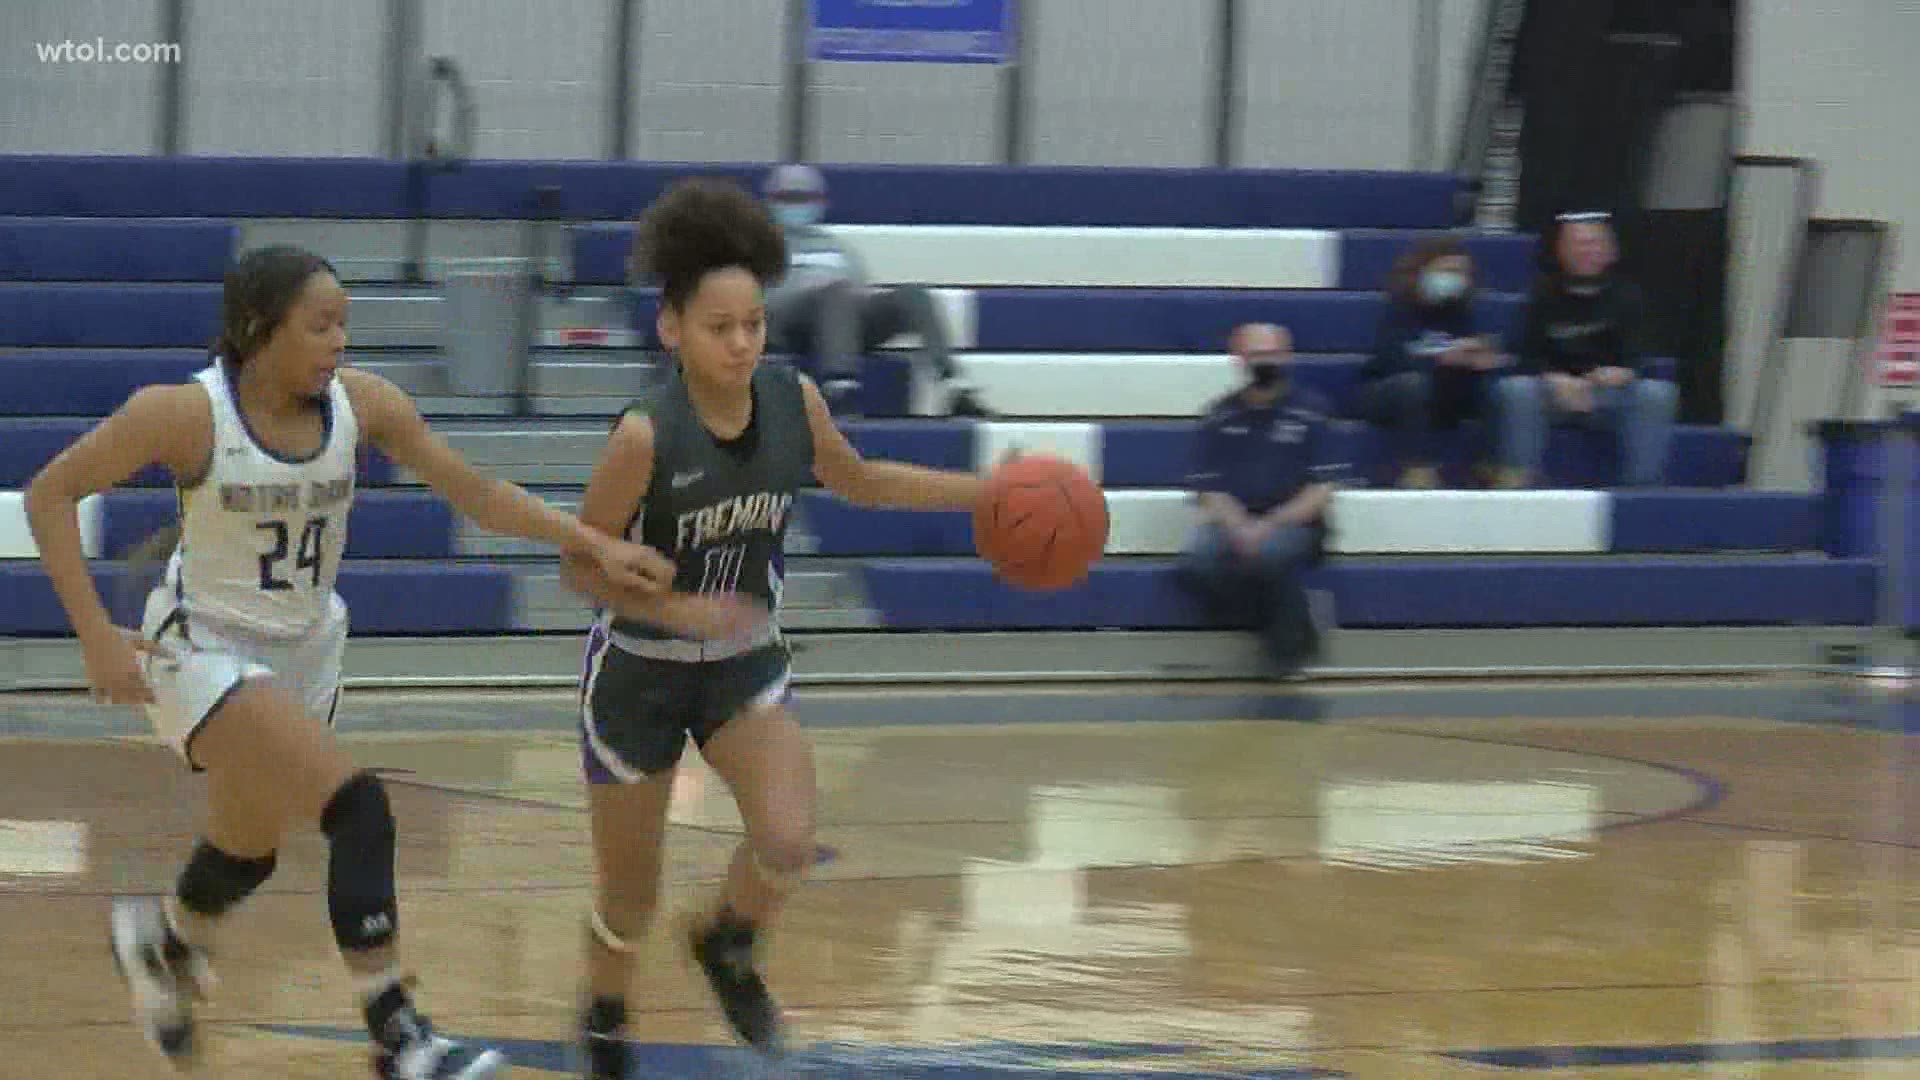 WTOL 11 Sports reporter Kristi Kopanis brings you highlights from the OHSAA girls basketball playoff tournament.